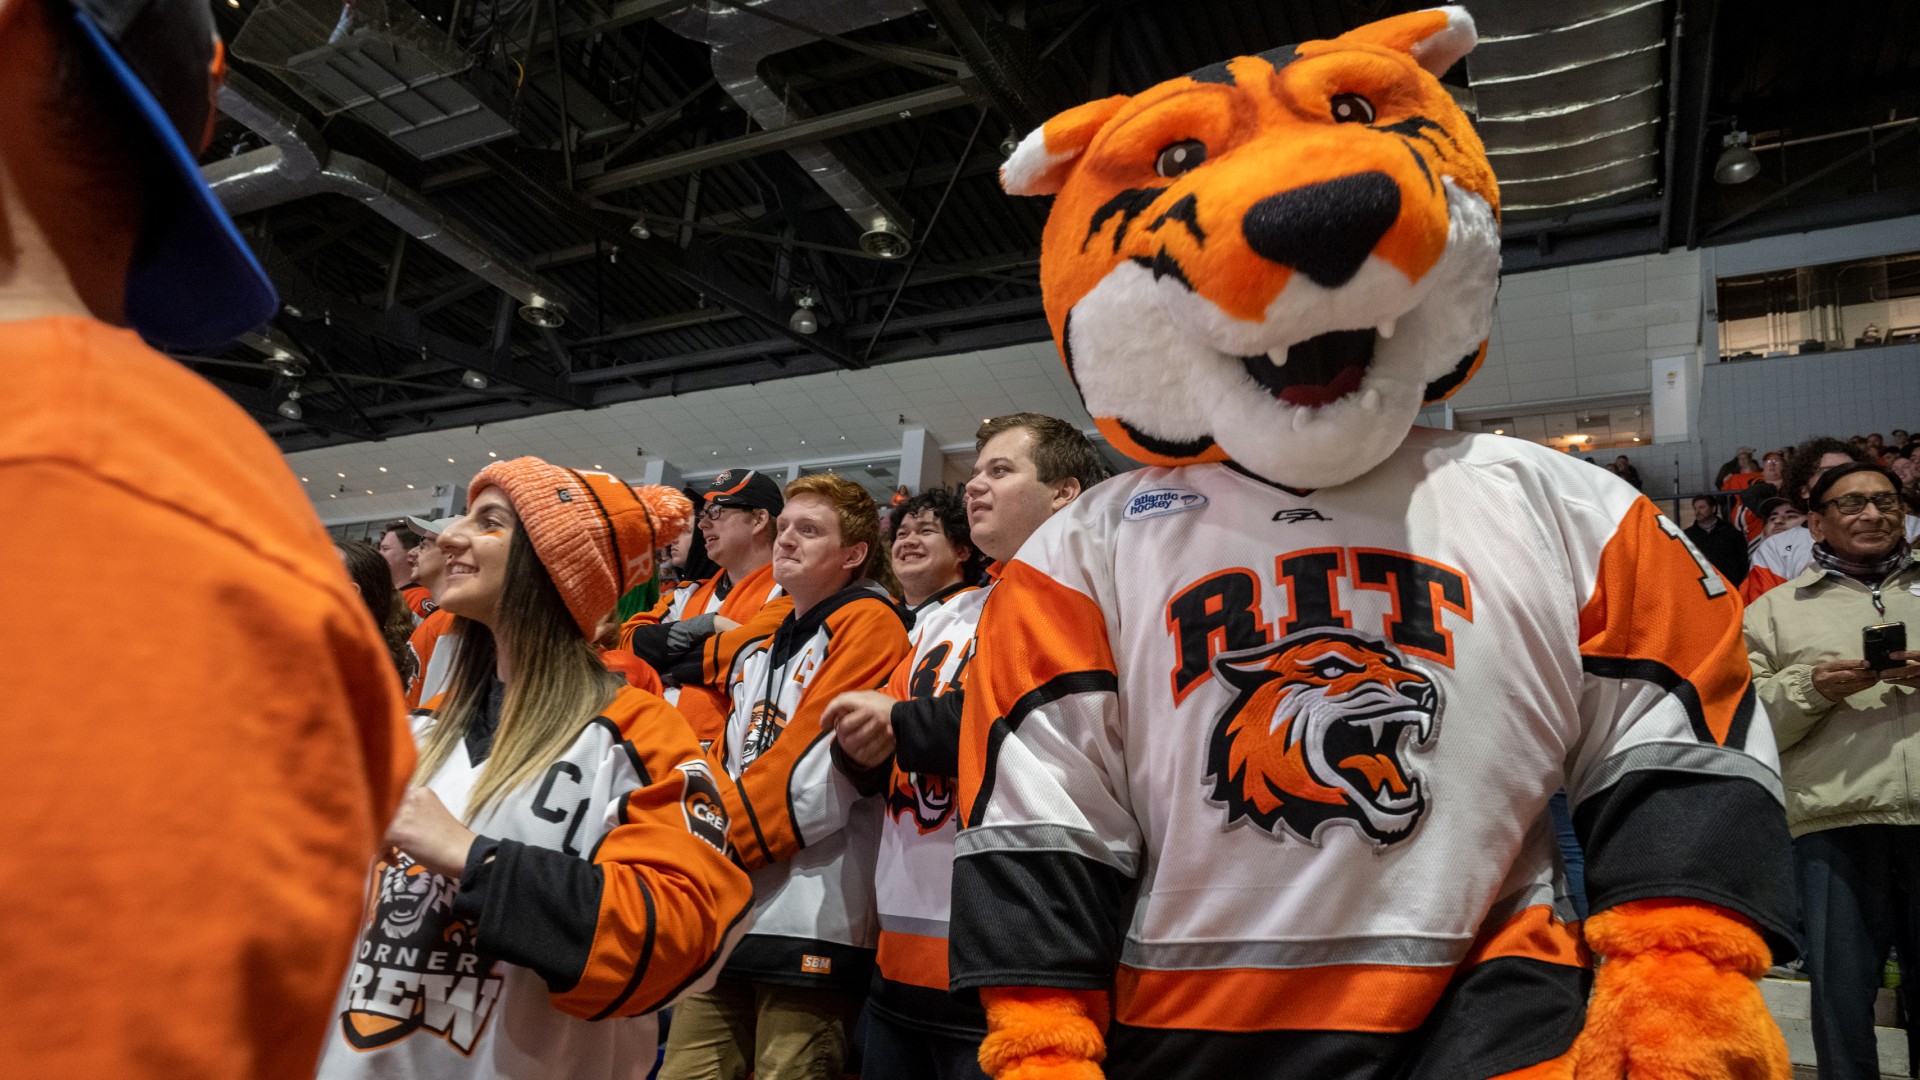 Image of RIT students and RITchie watching the Men's Hockey game with excitement.